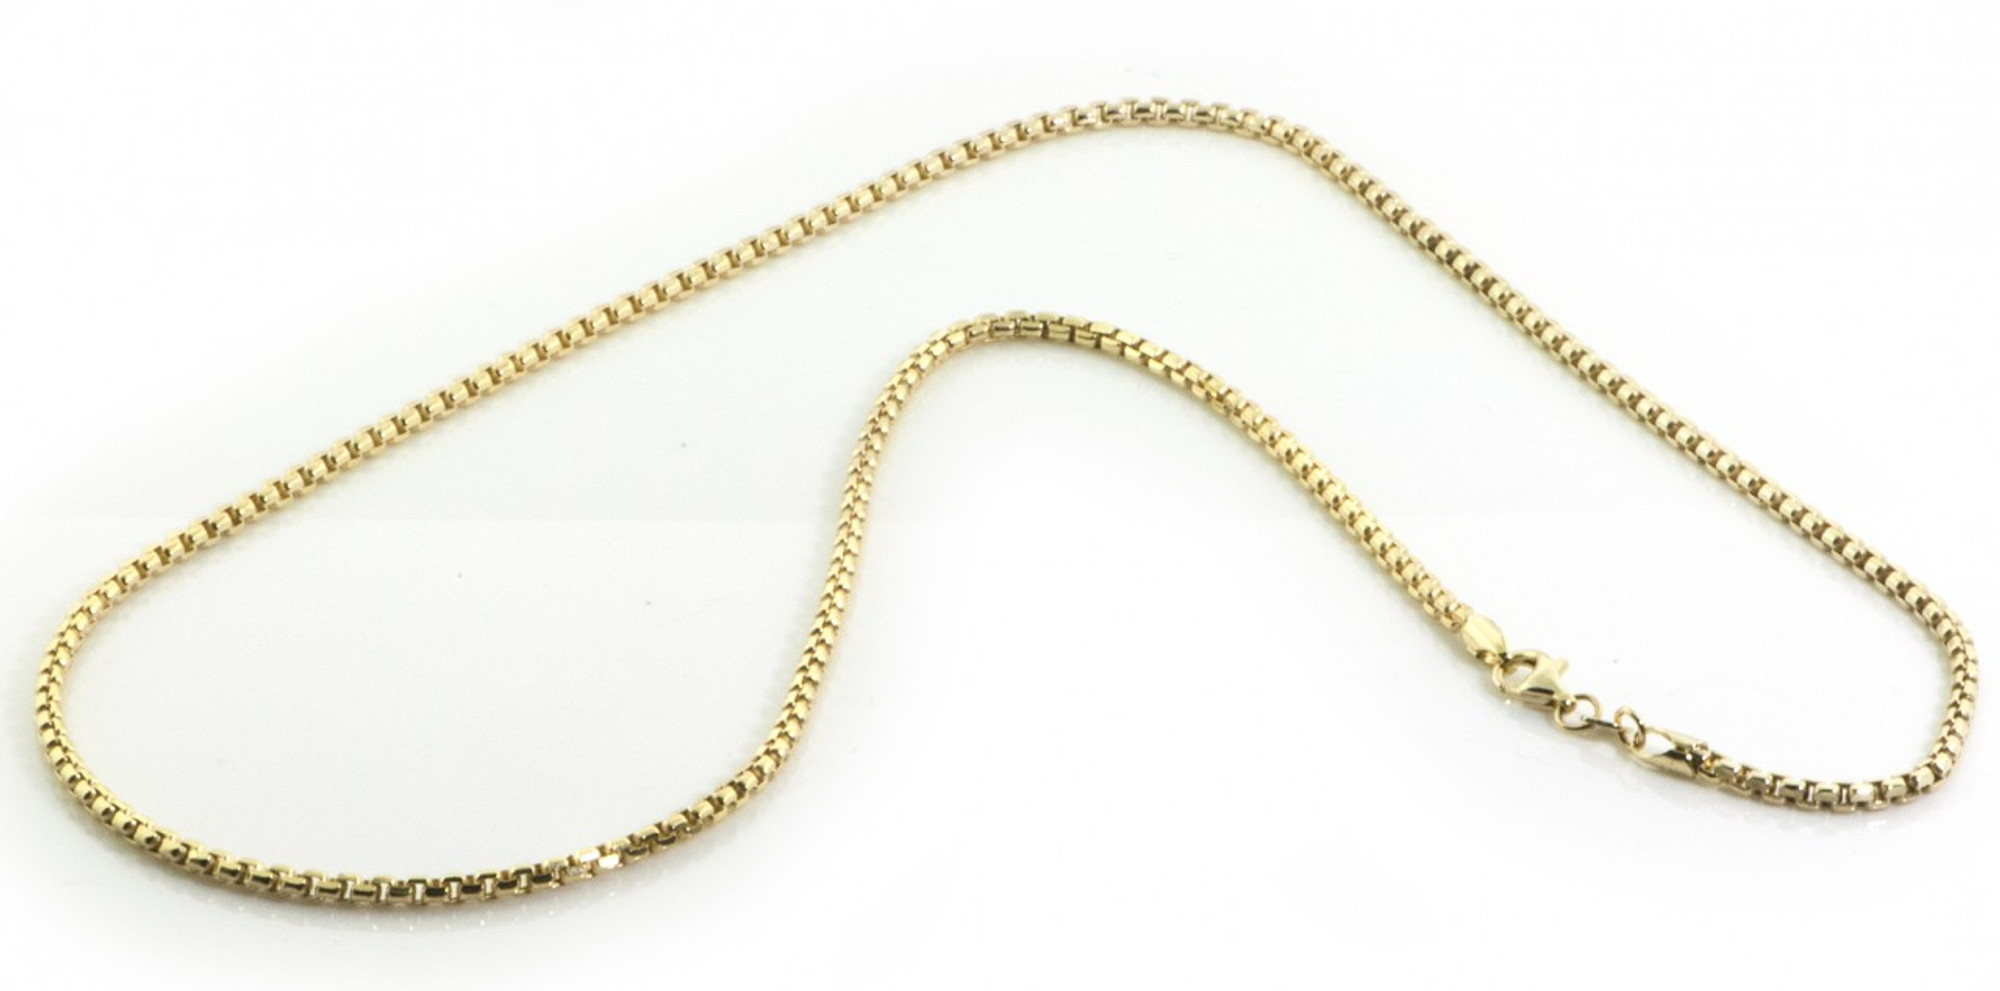 14k Yellow Gold 2.5mm Round Box Chain Necklace 18 Inches | Sarraf.com